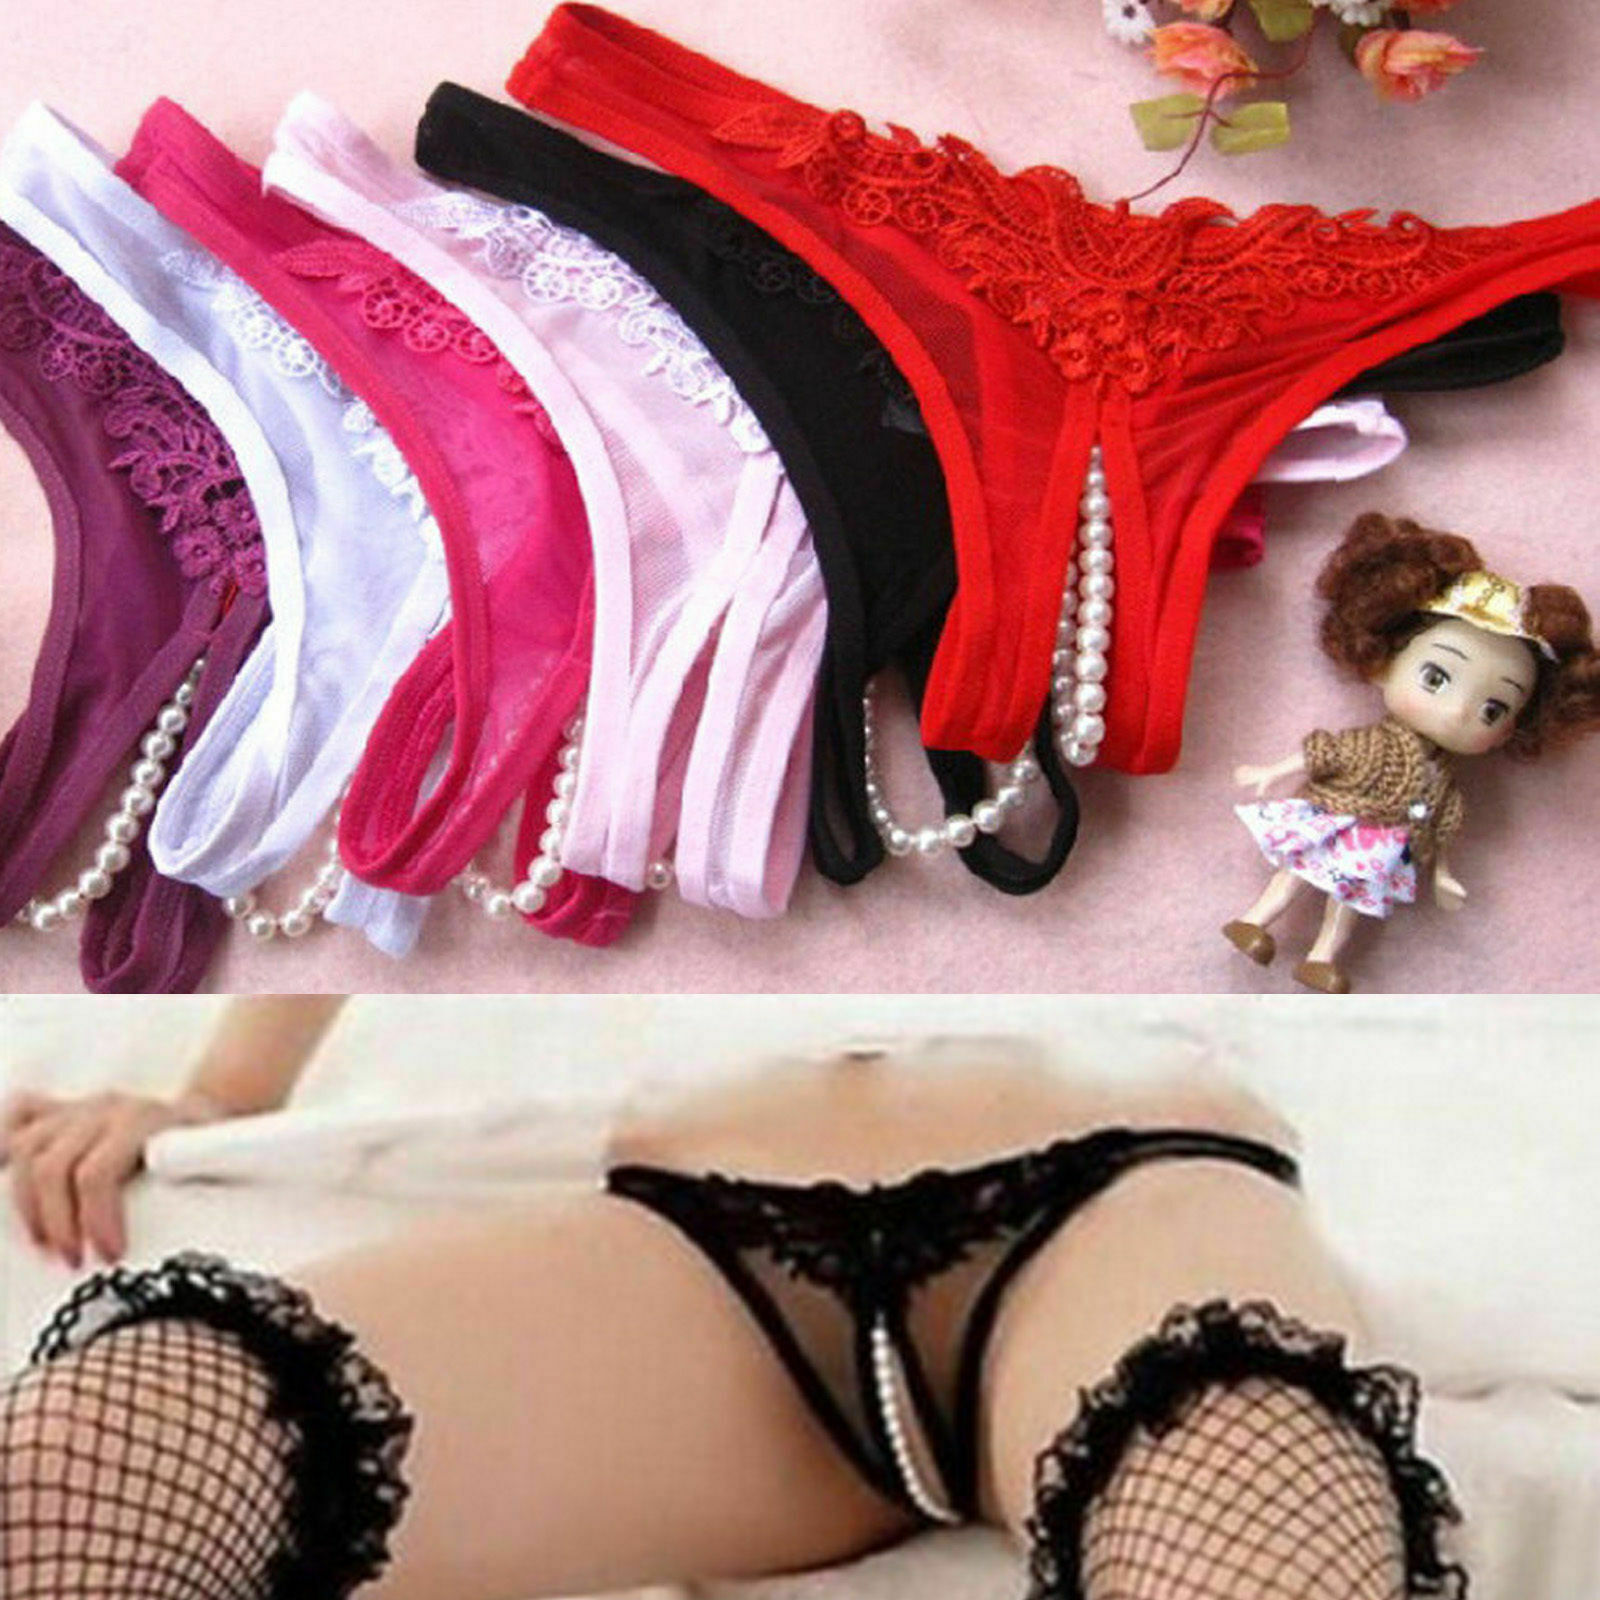 Women Sexy Lace Pearl Briefs Lingerie Knickers G-string Thongs Panties Underwear Unbranded Does not apply